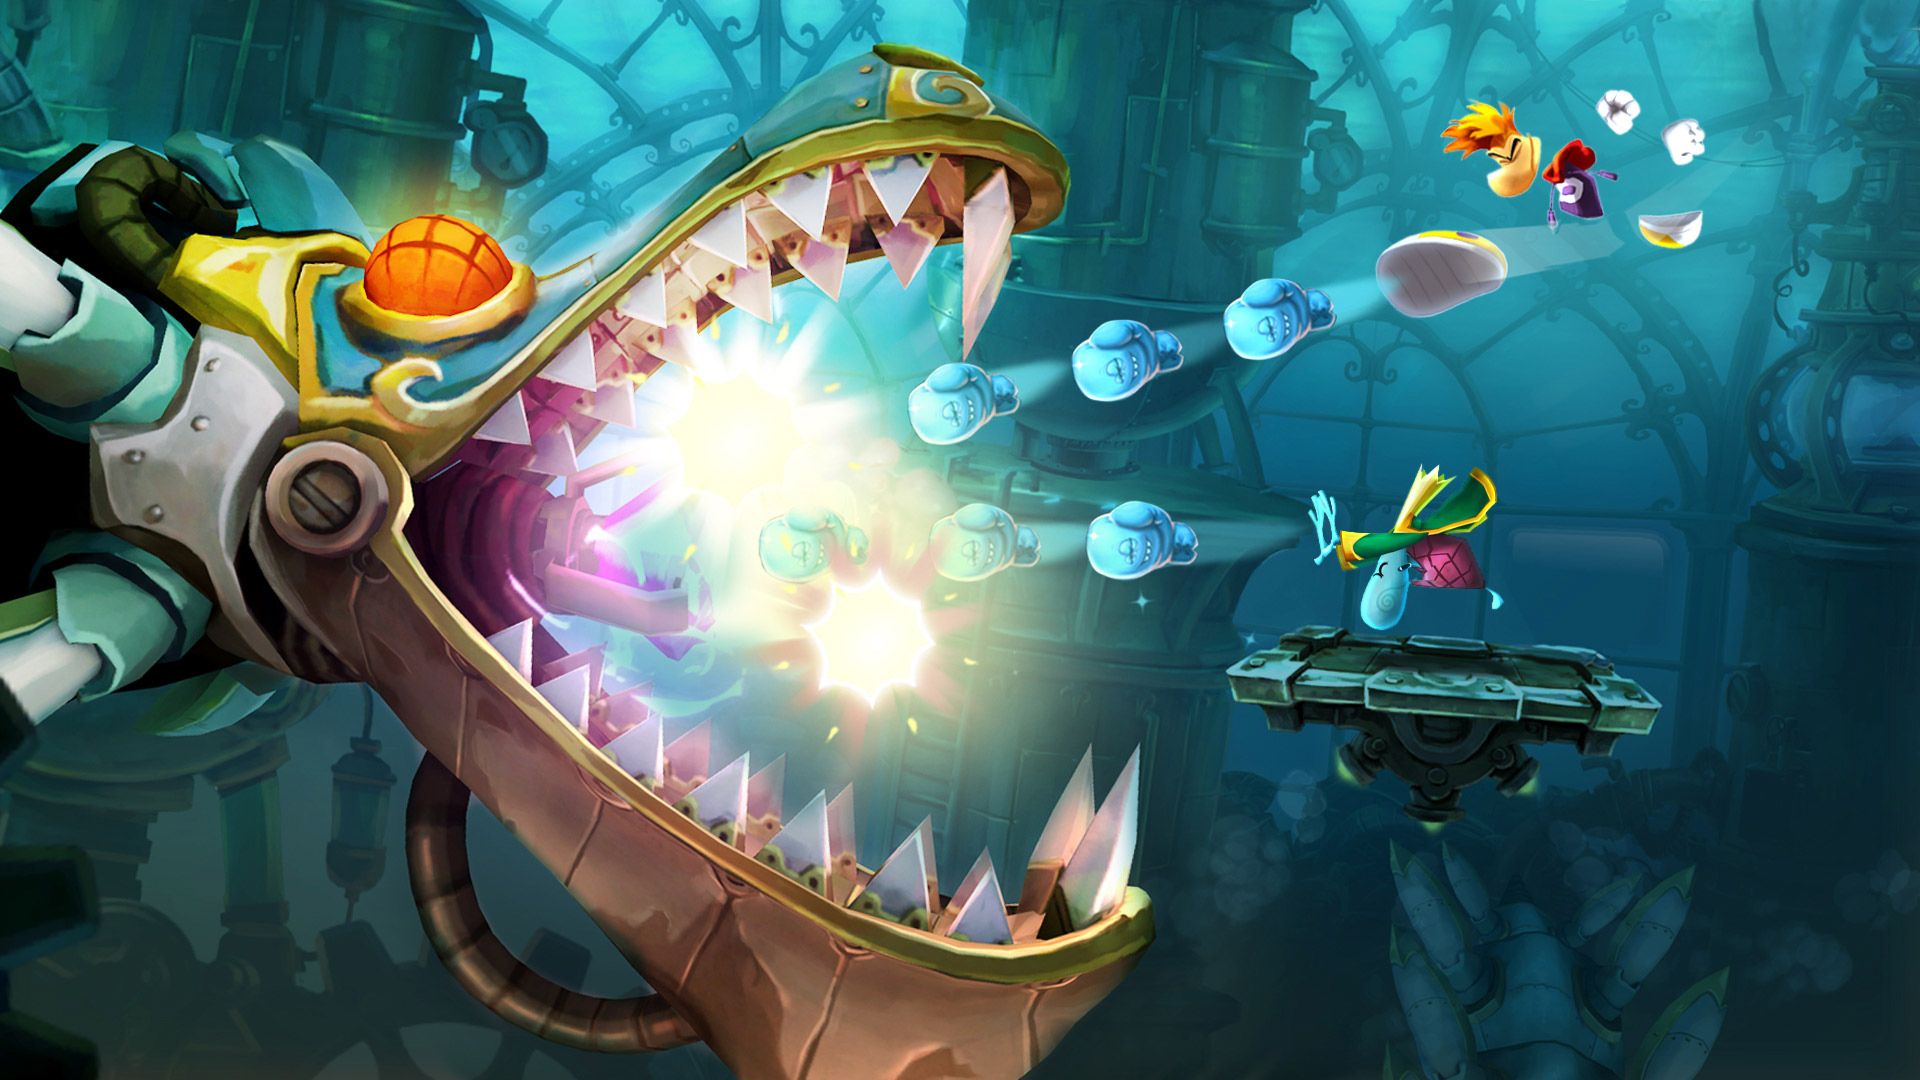 rayman legends review image 1